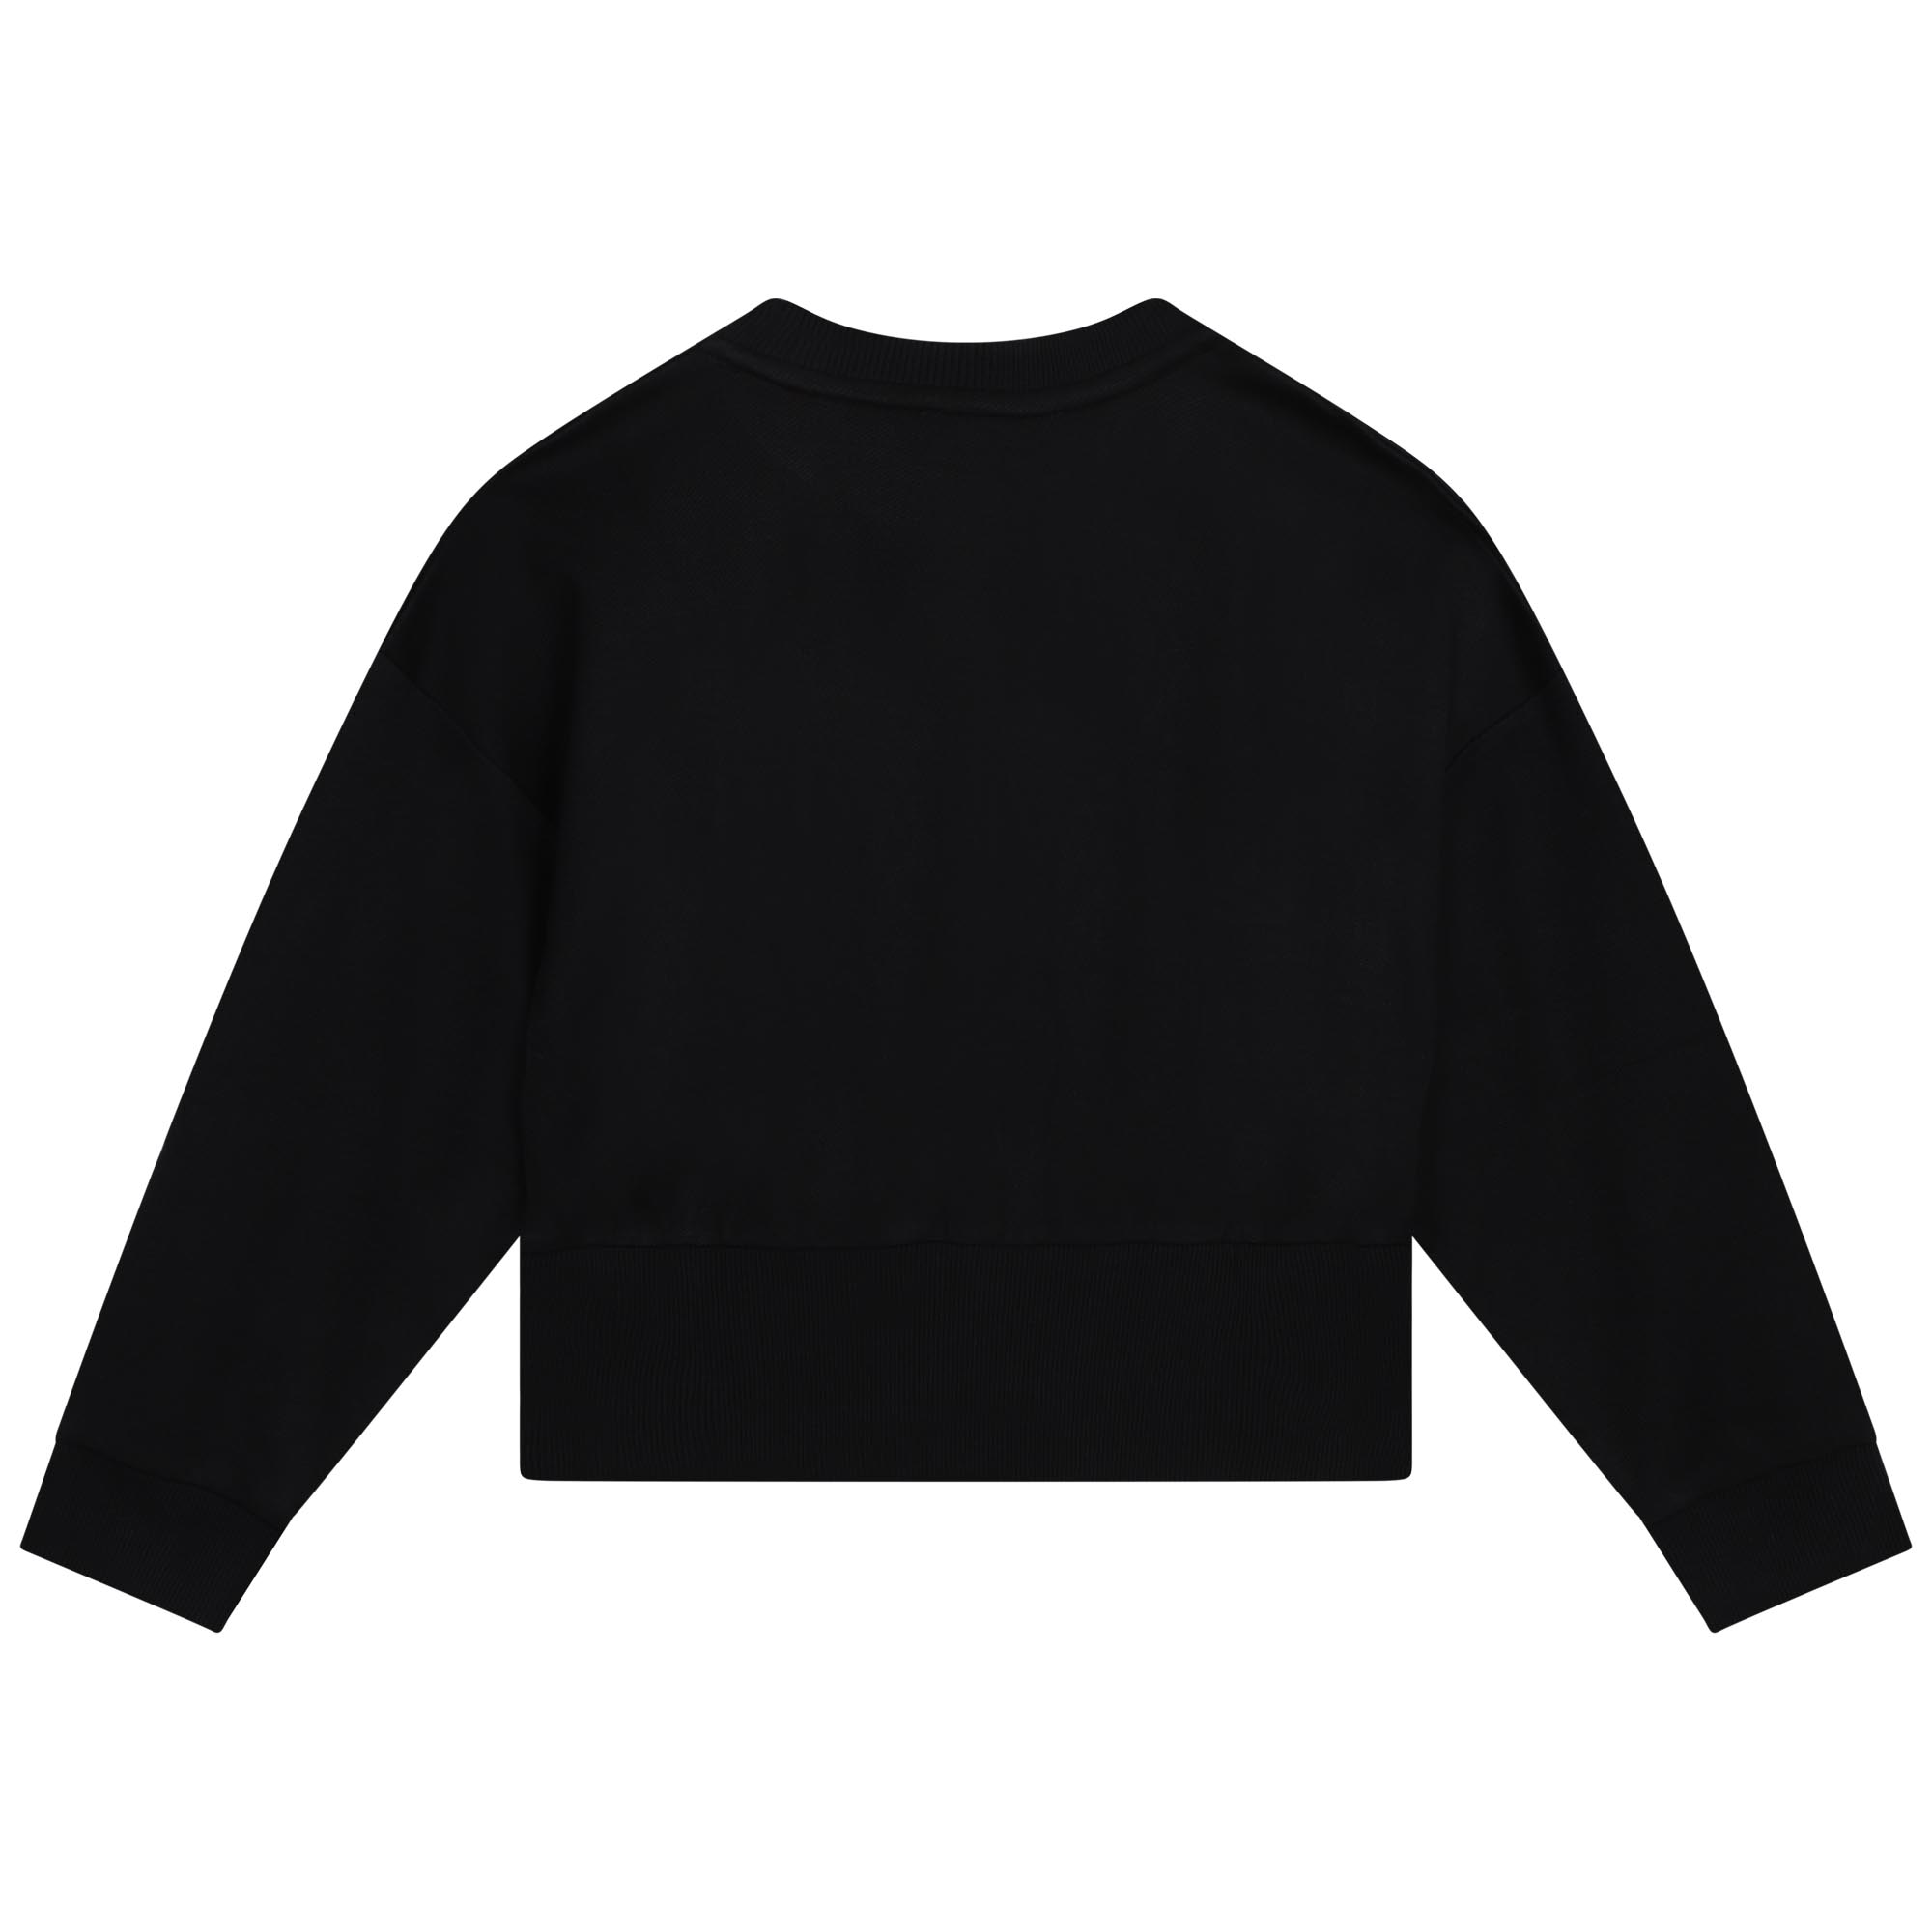 Embroidered sweatshirt DKNY for GIRL